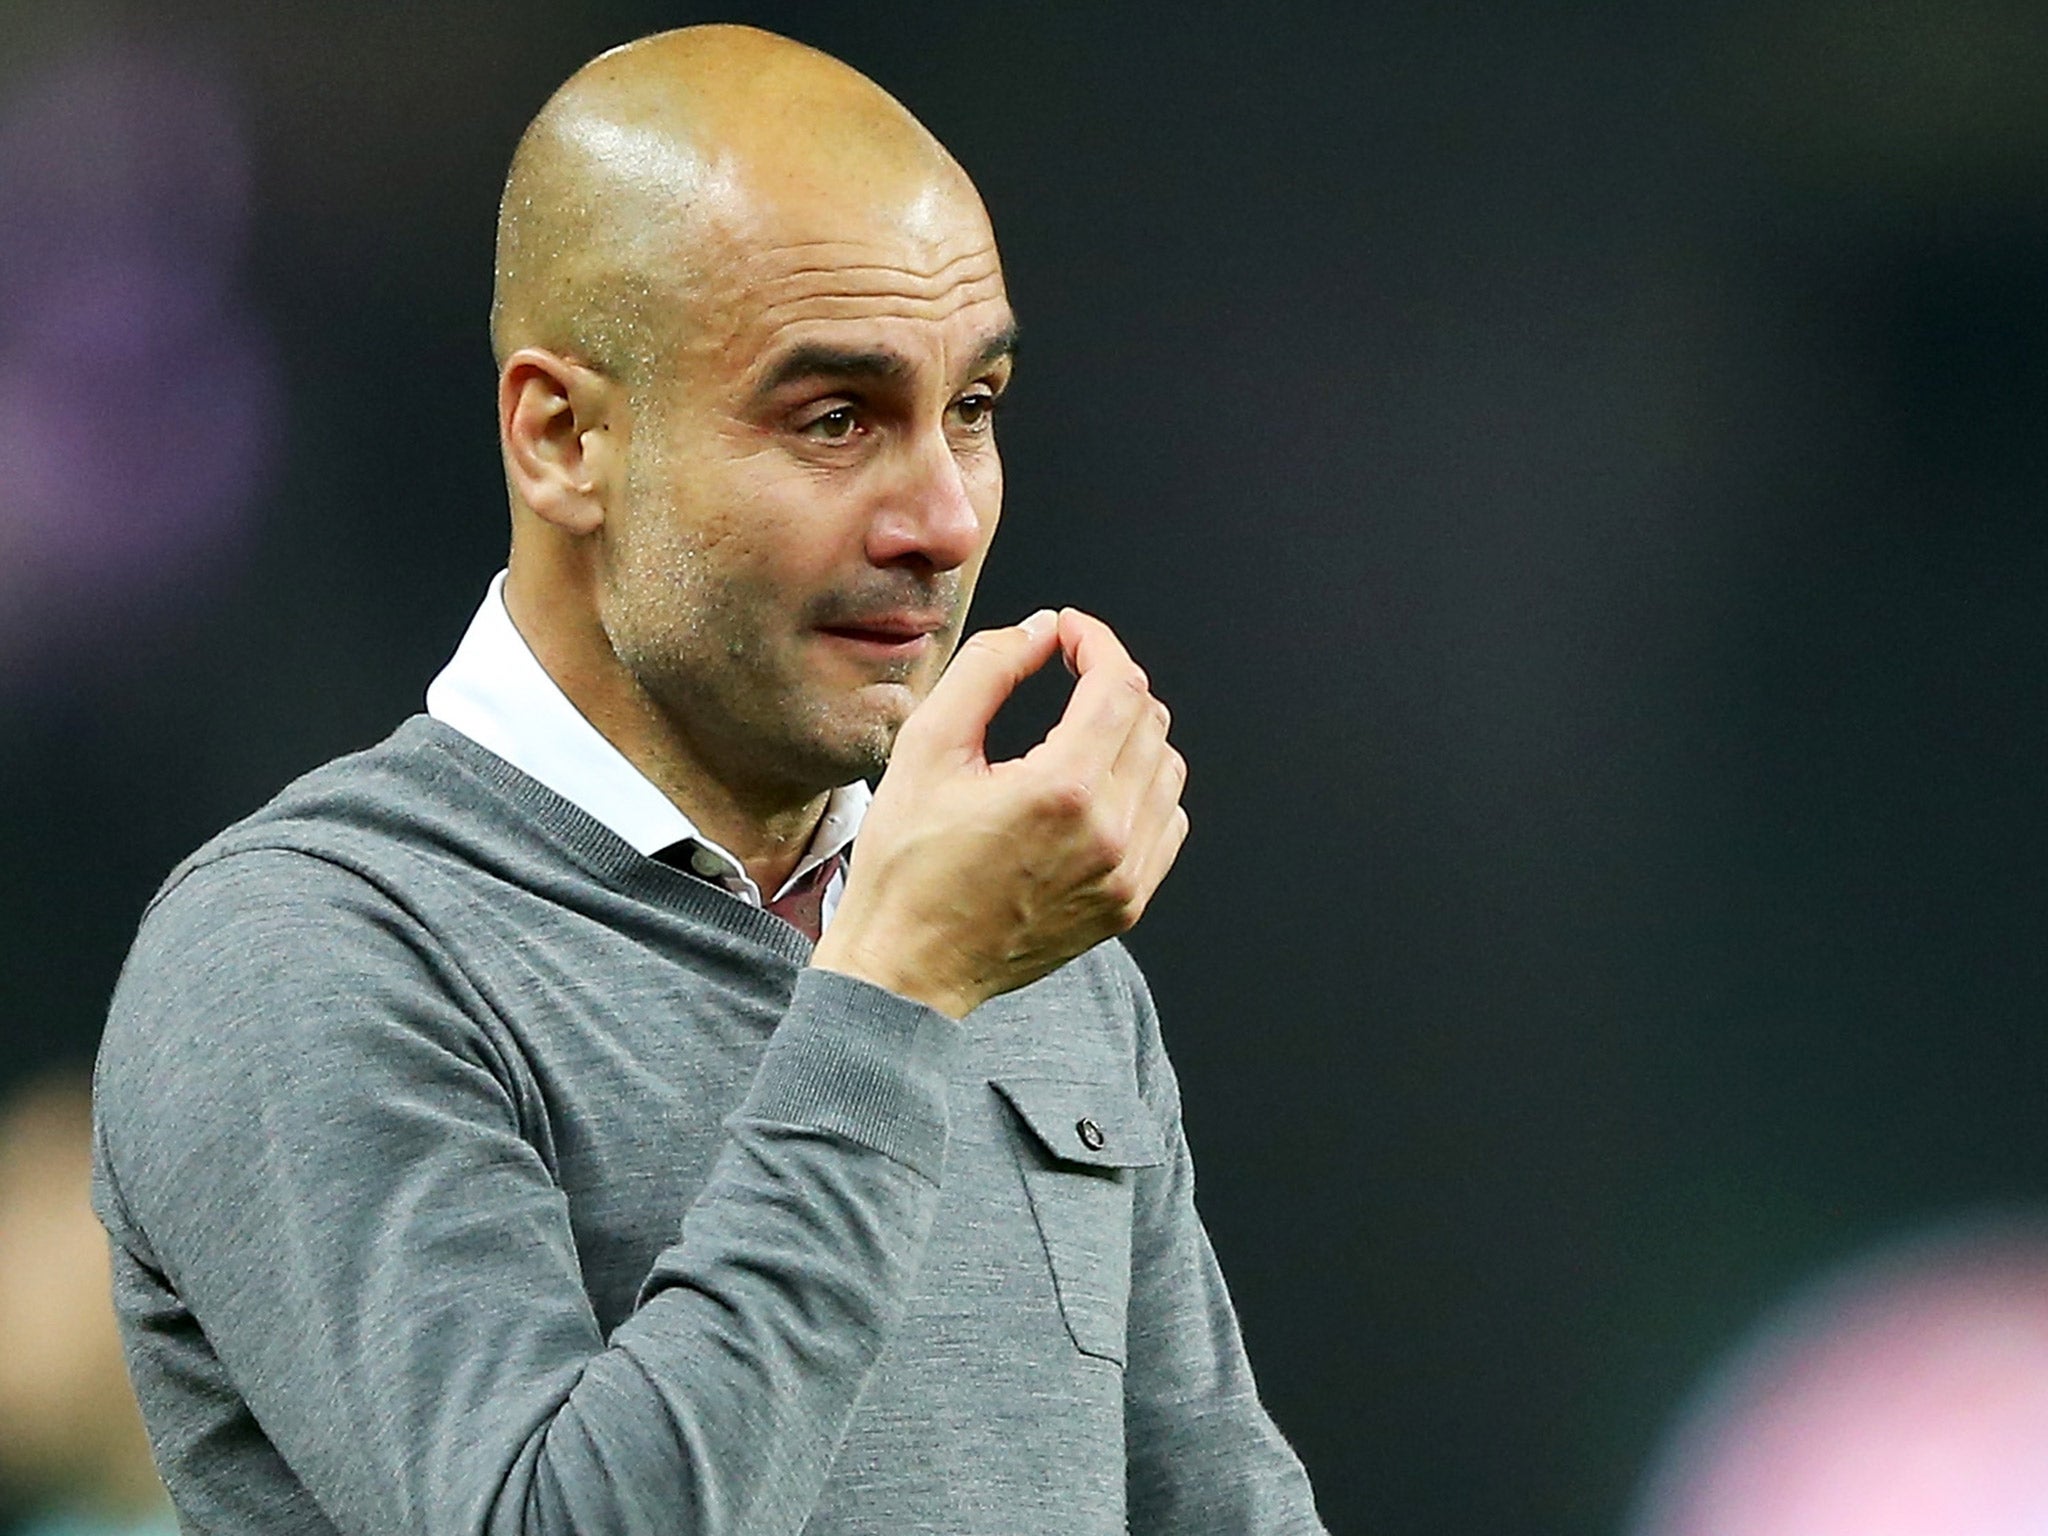 Pep Guardiola should get off to a good start at Manchester City